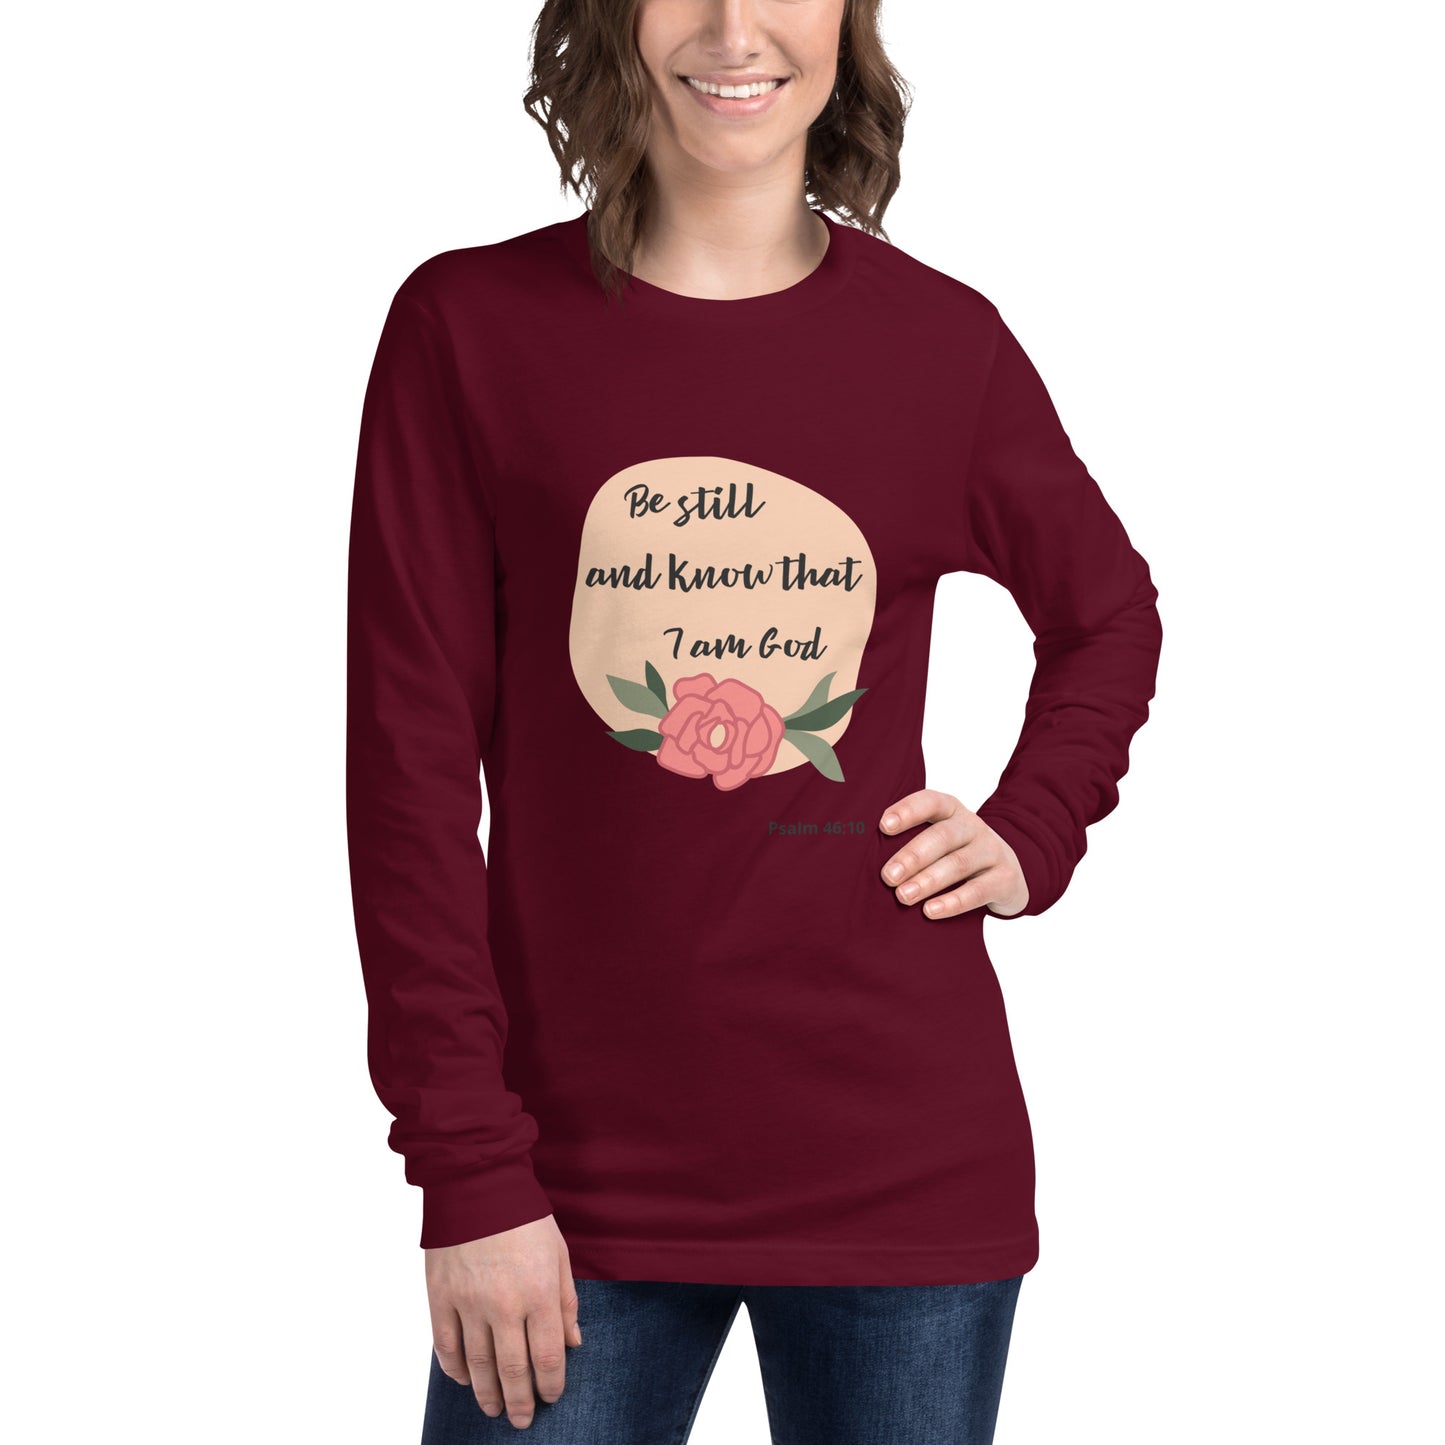 maroon color christian t shirt